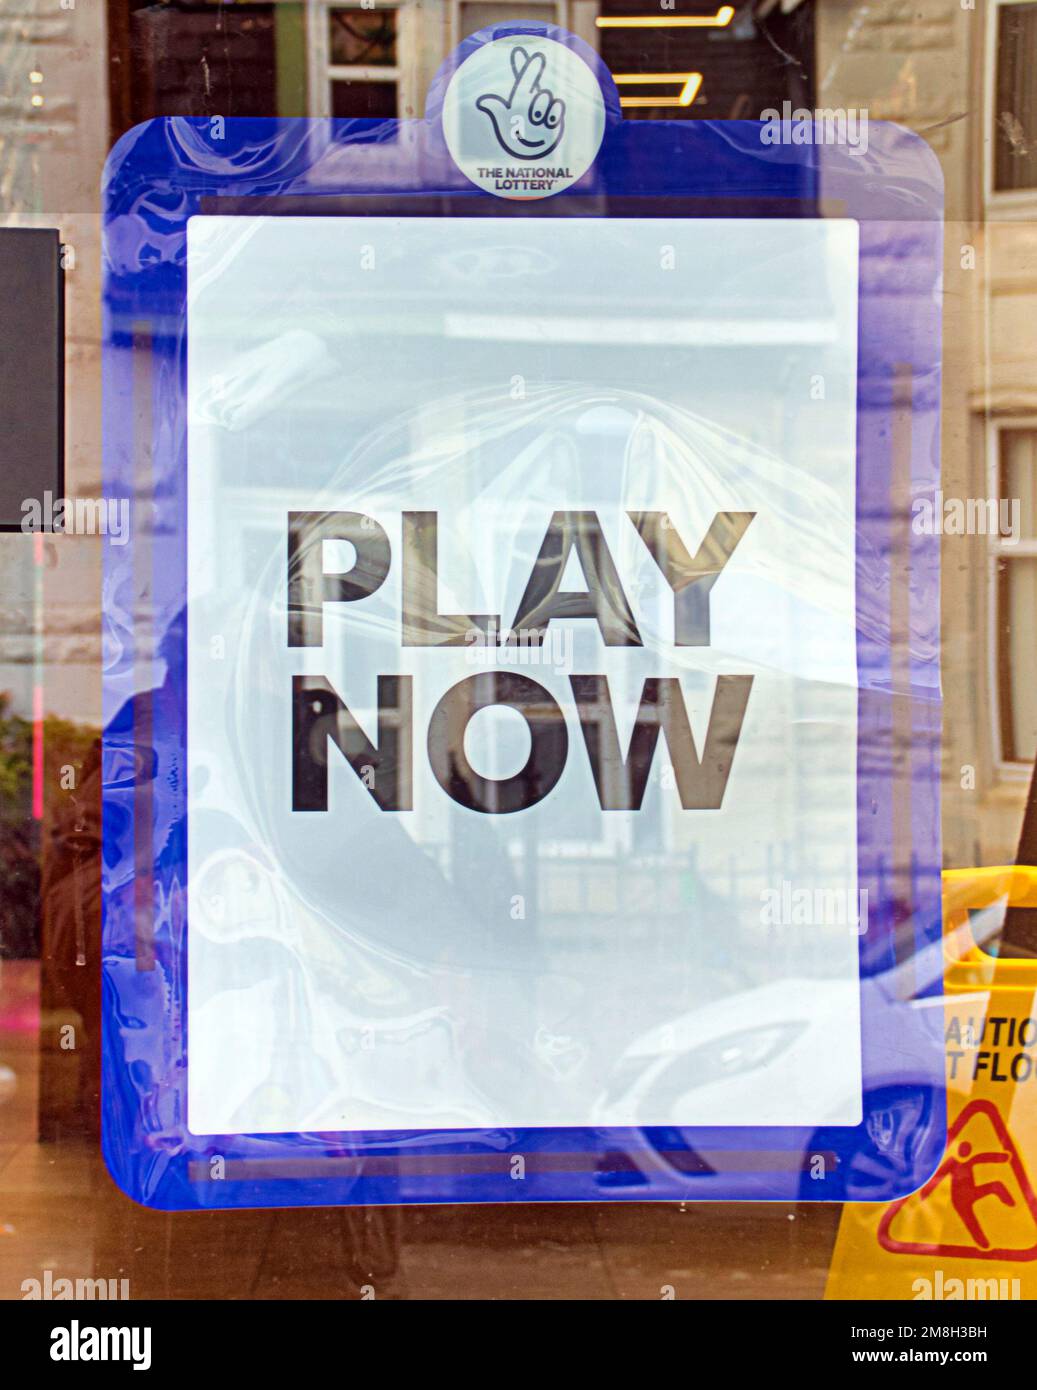 National lottery play now poster in shop window Stock Photo